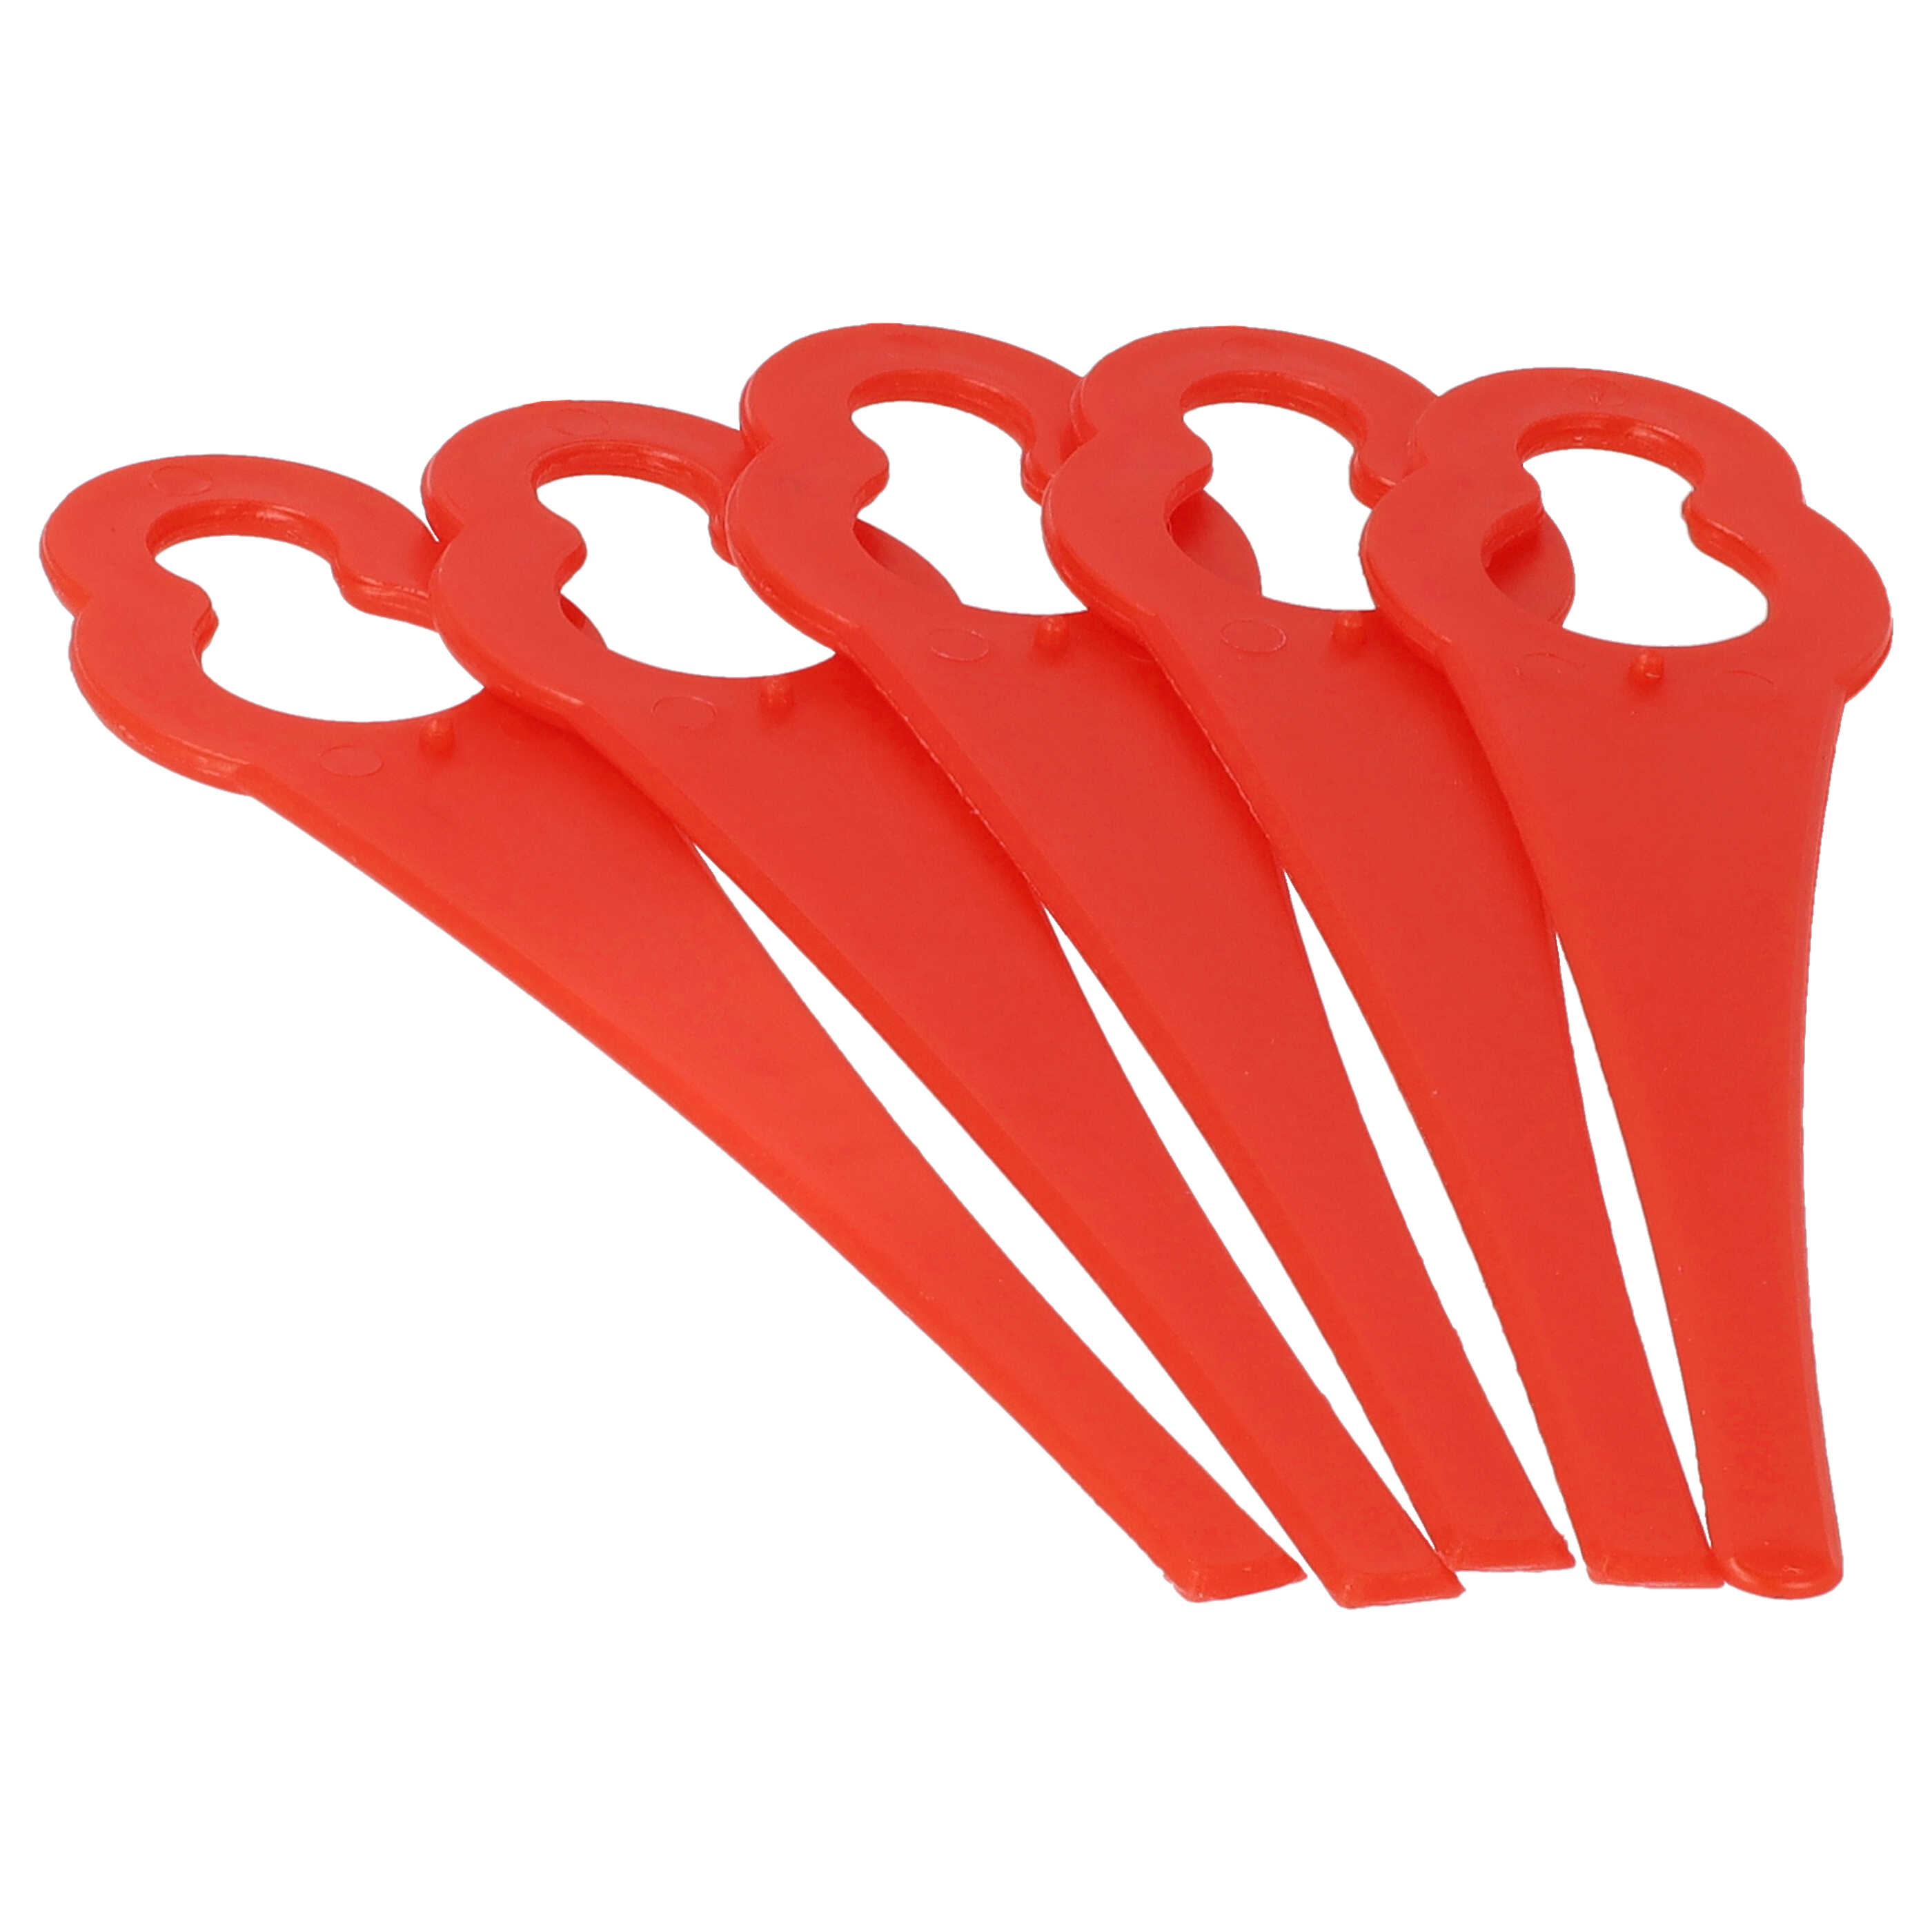 5x Exchange Blade replaces ALM BQ026 for Cordless Strimmer etc. - nylon / plastic, red